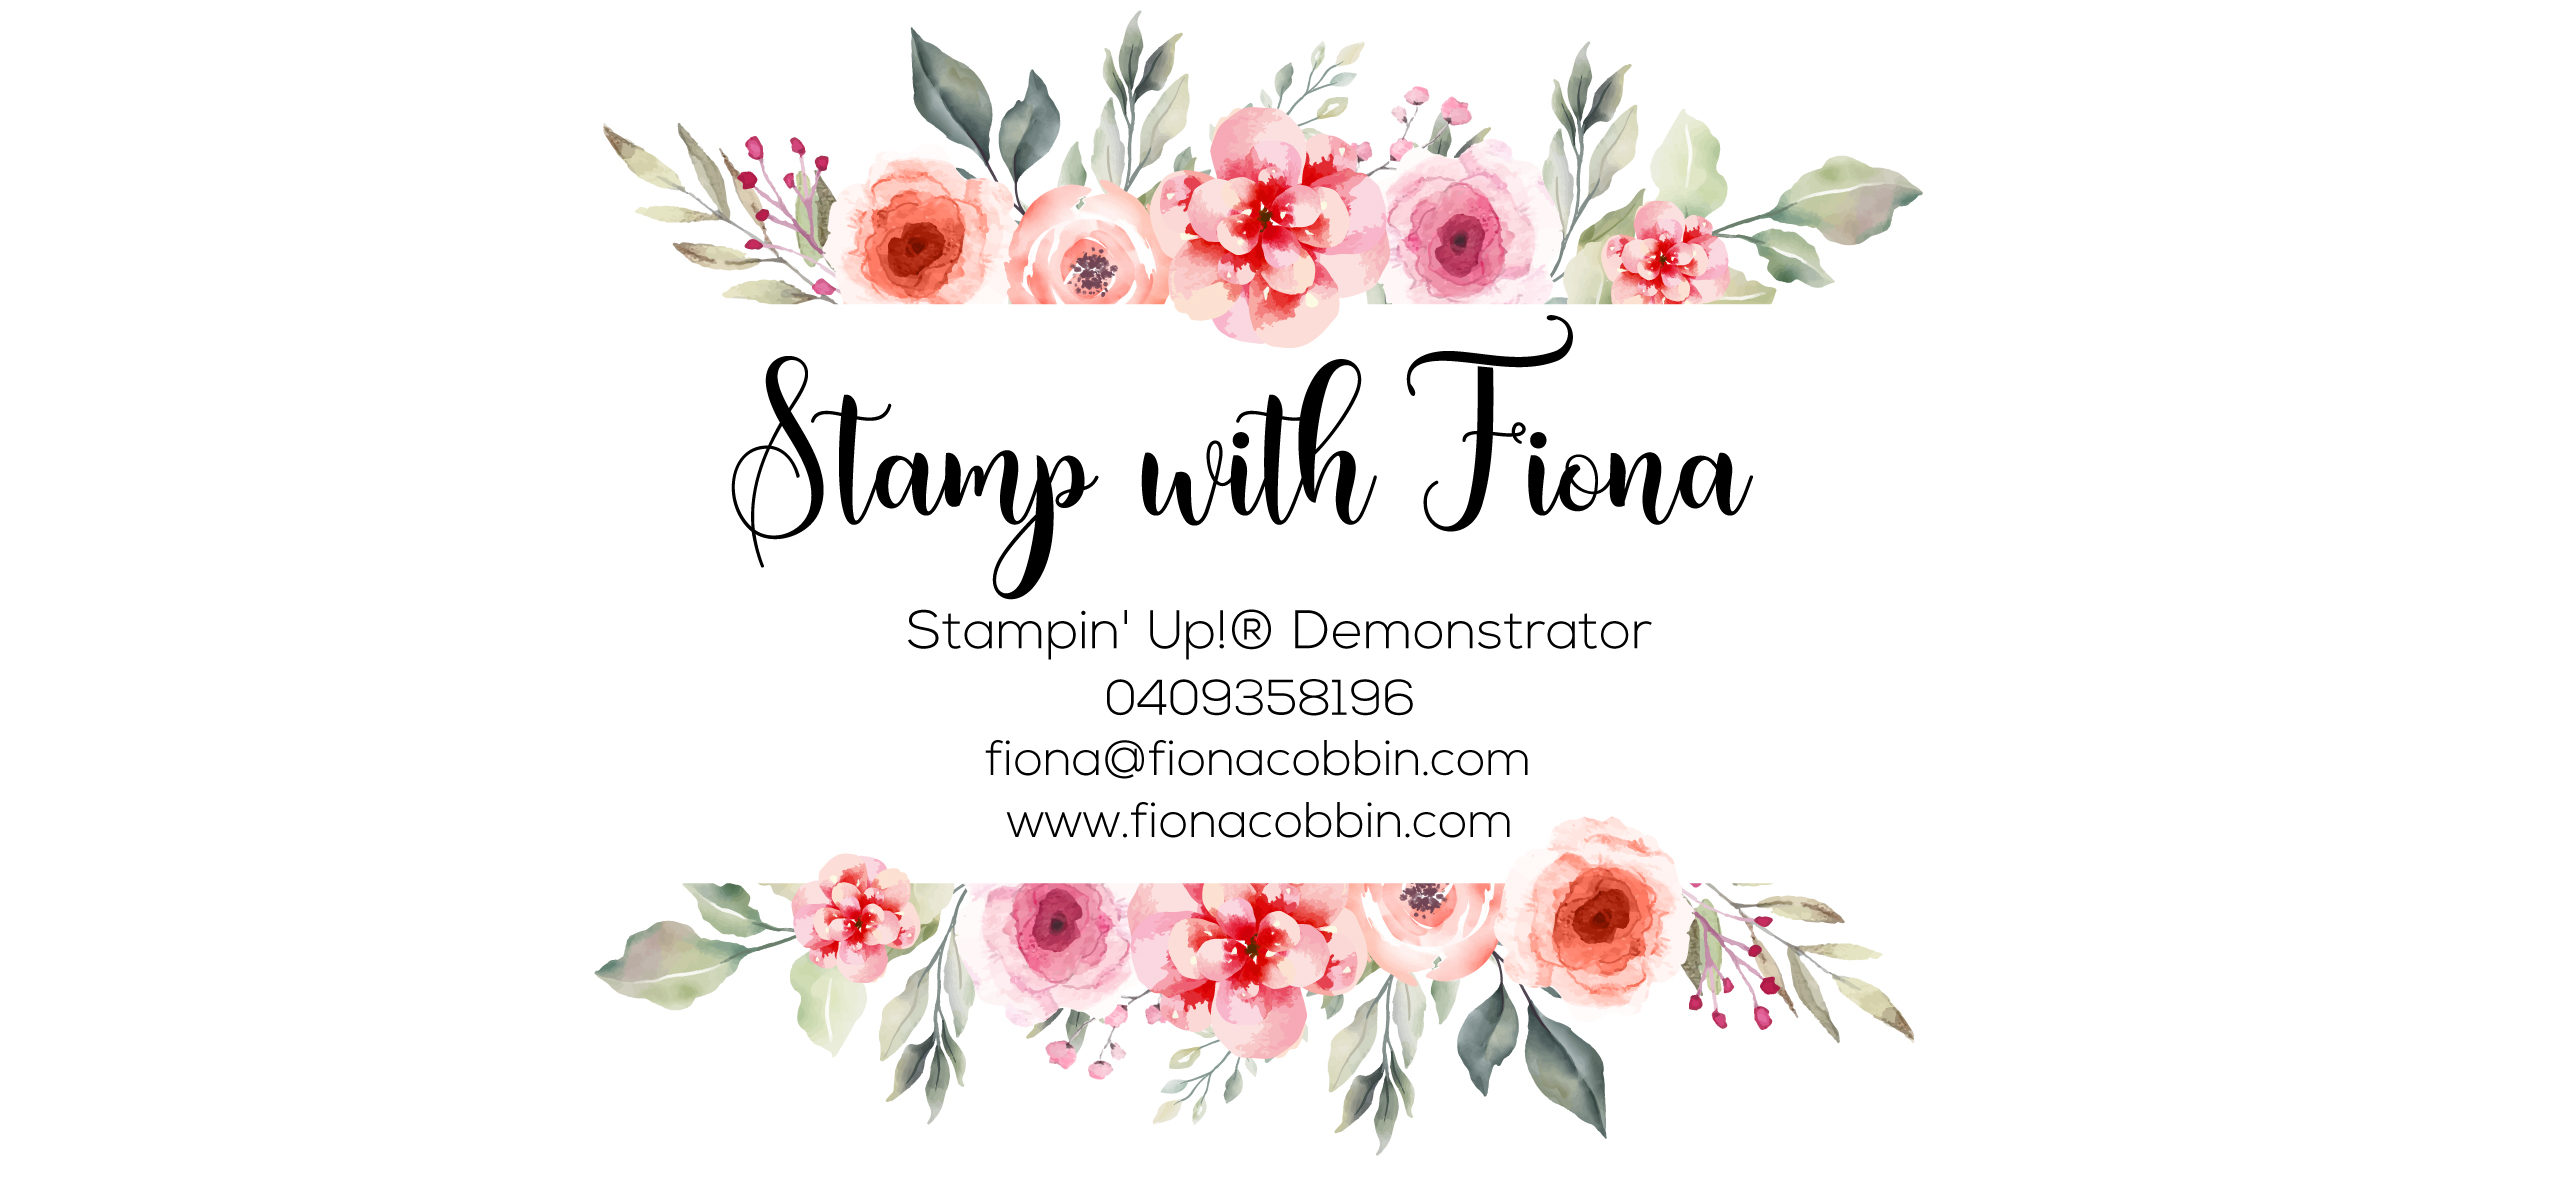 Stamp with Fiona